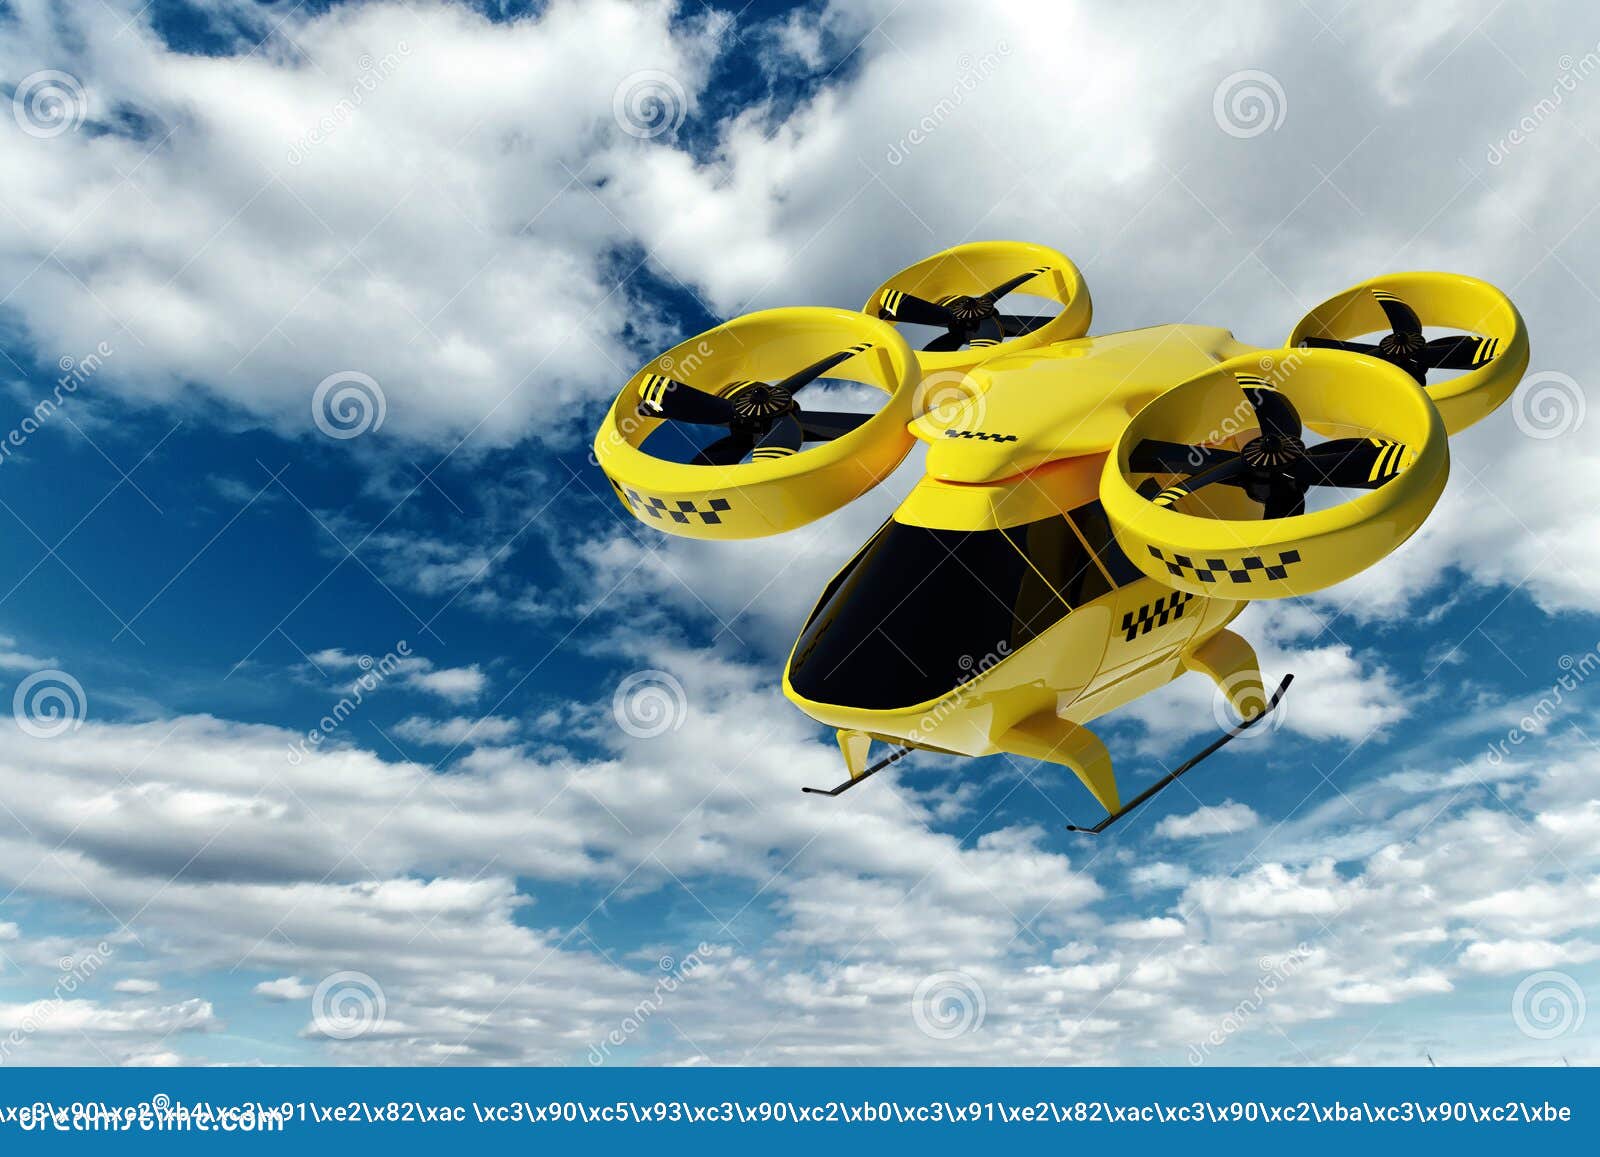 yellow flying taxi against the sky, city electric transport drone. car with propellers, clean air, fast ride. mixed media, copy